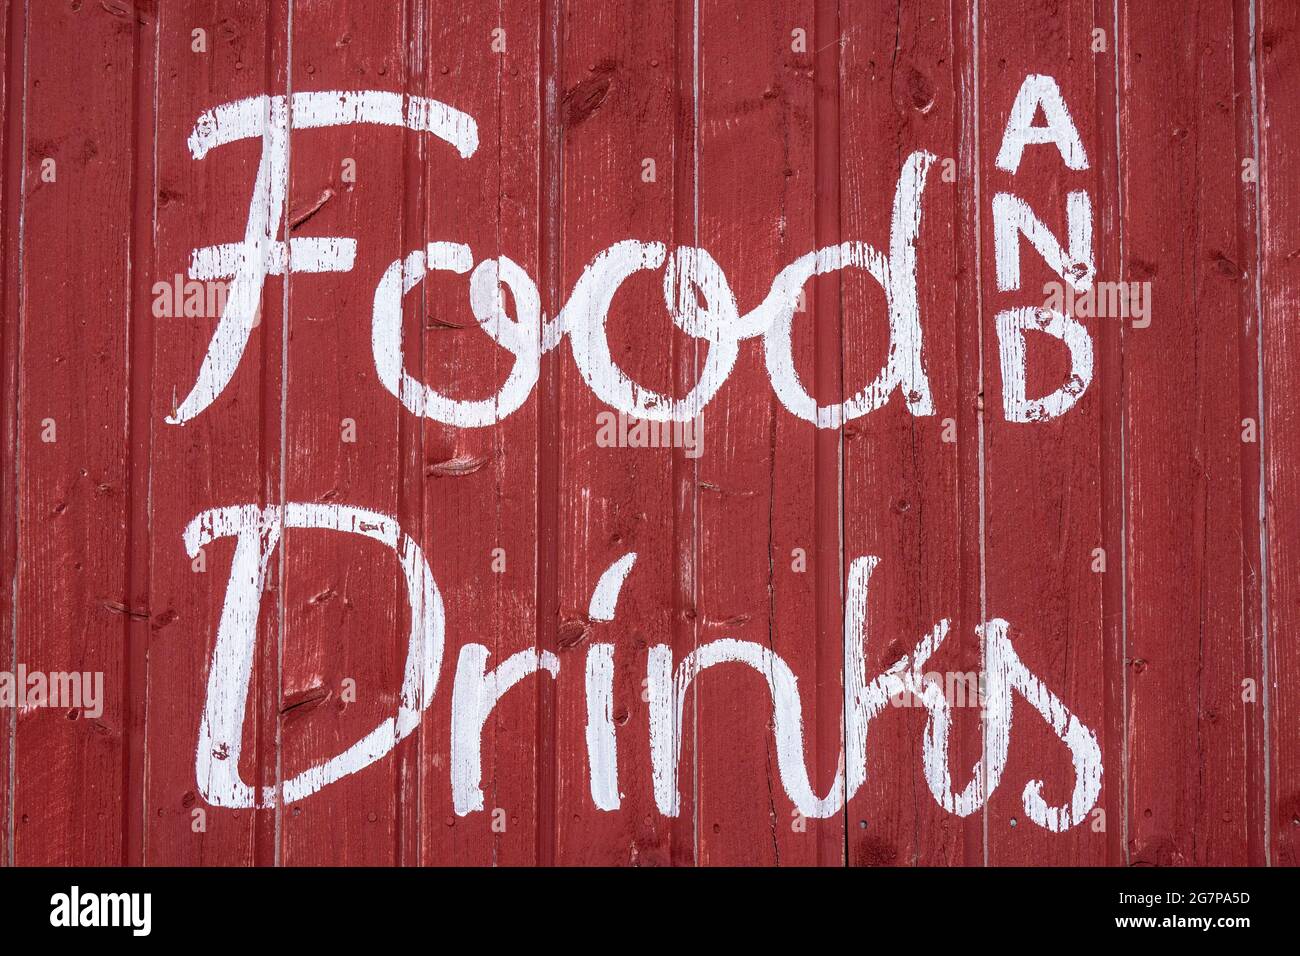 Food and Drinks. White text on red wooden wall in Liuskaluoto Islet, Helsinki, Finland. Stock Photo